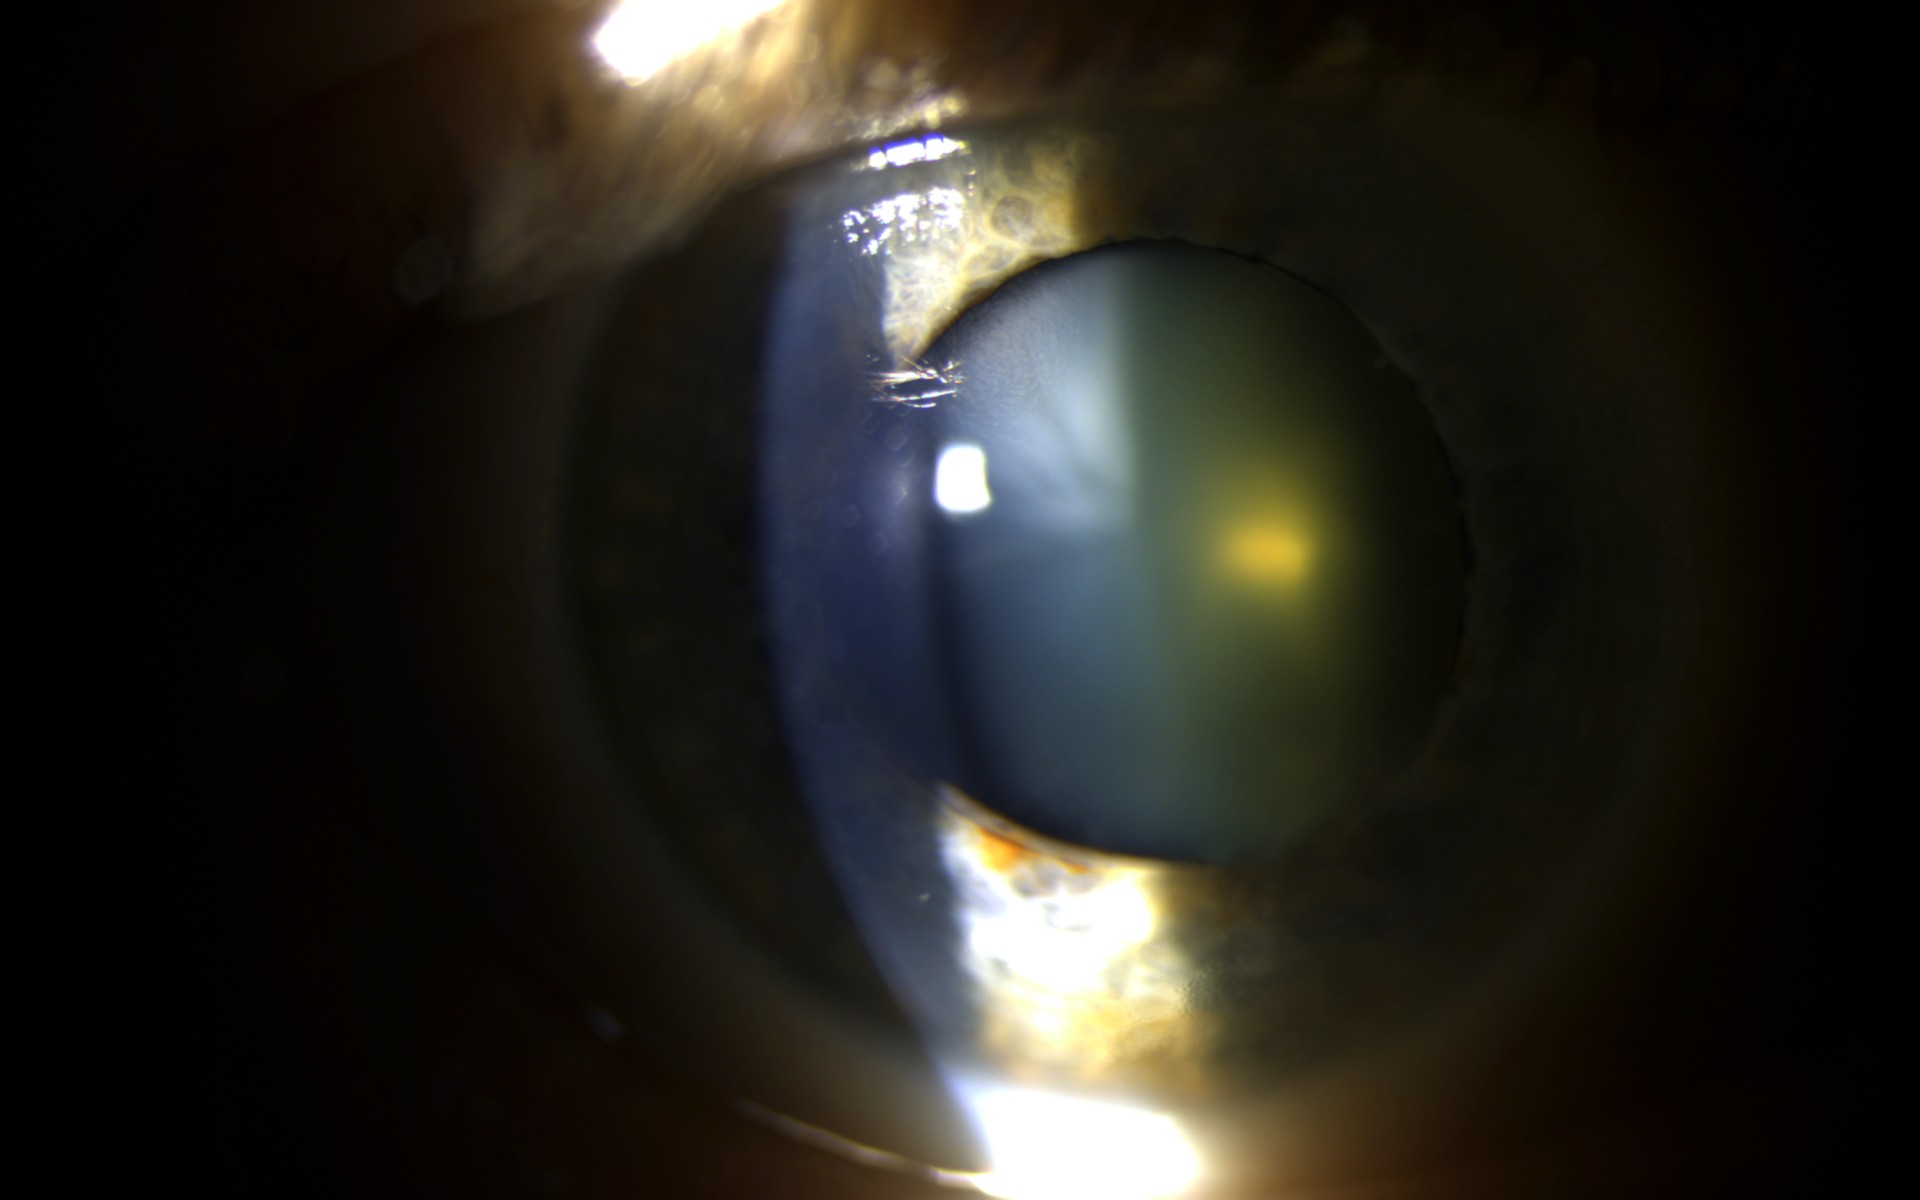 Slit lamp examination showing cloudy lens